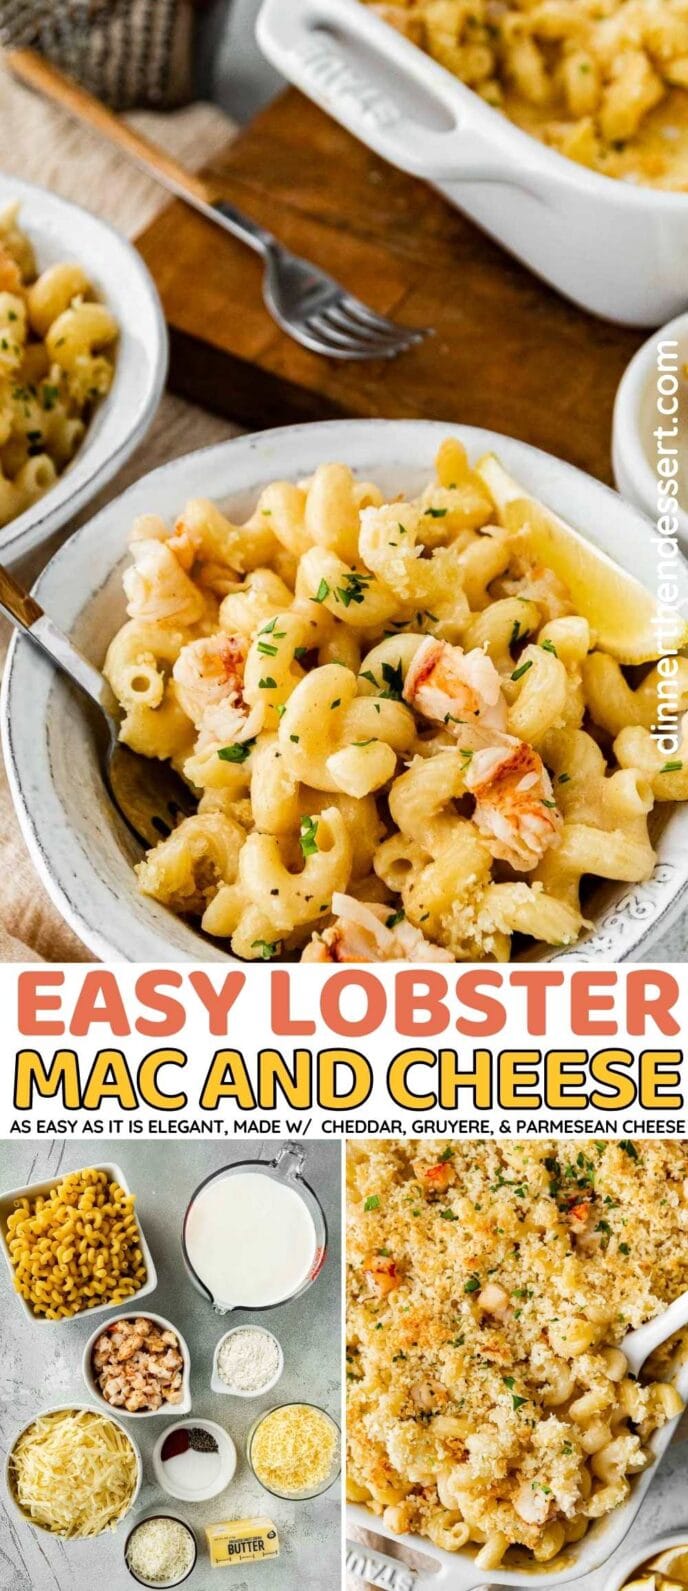 Lobster Mac and Cheese collage